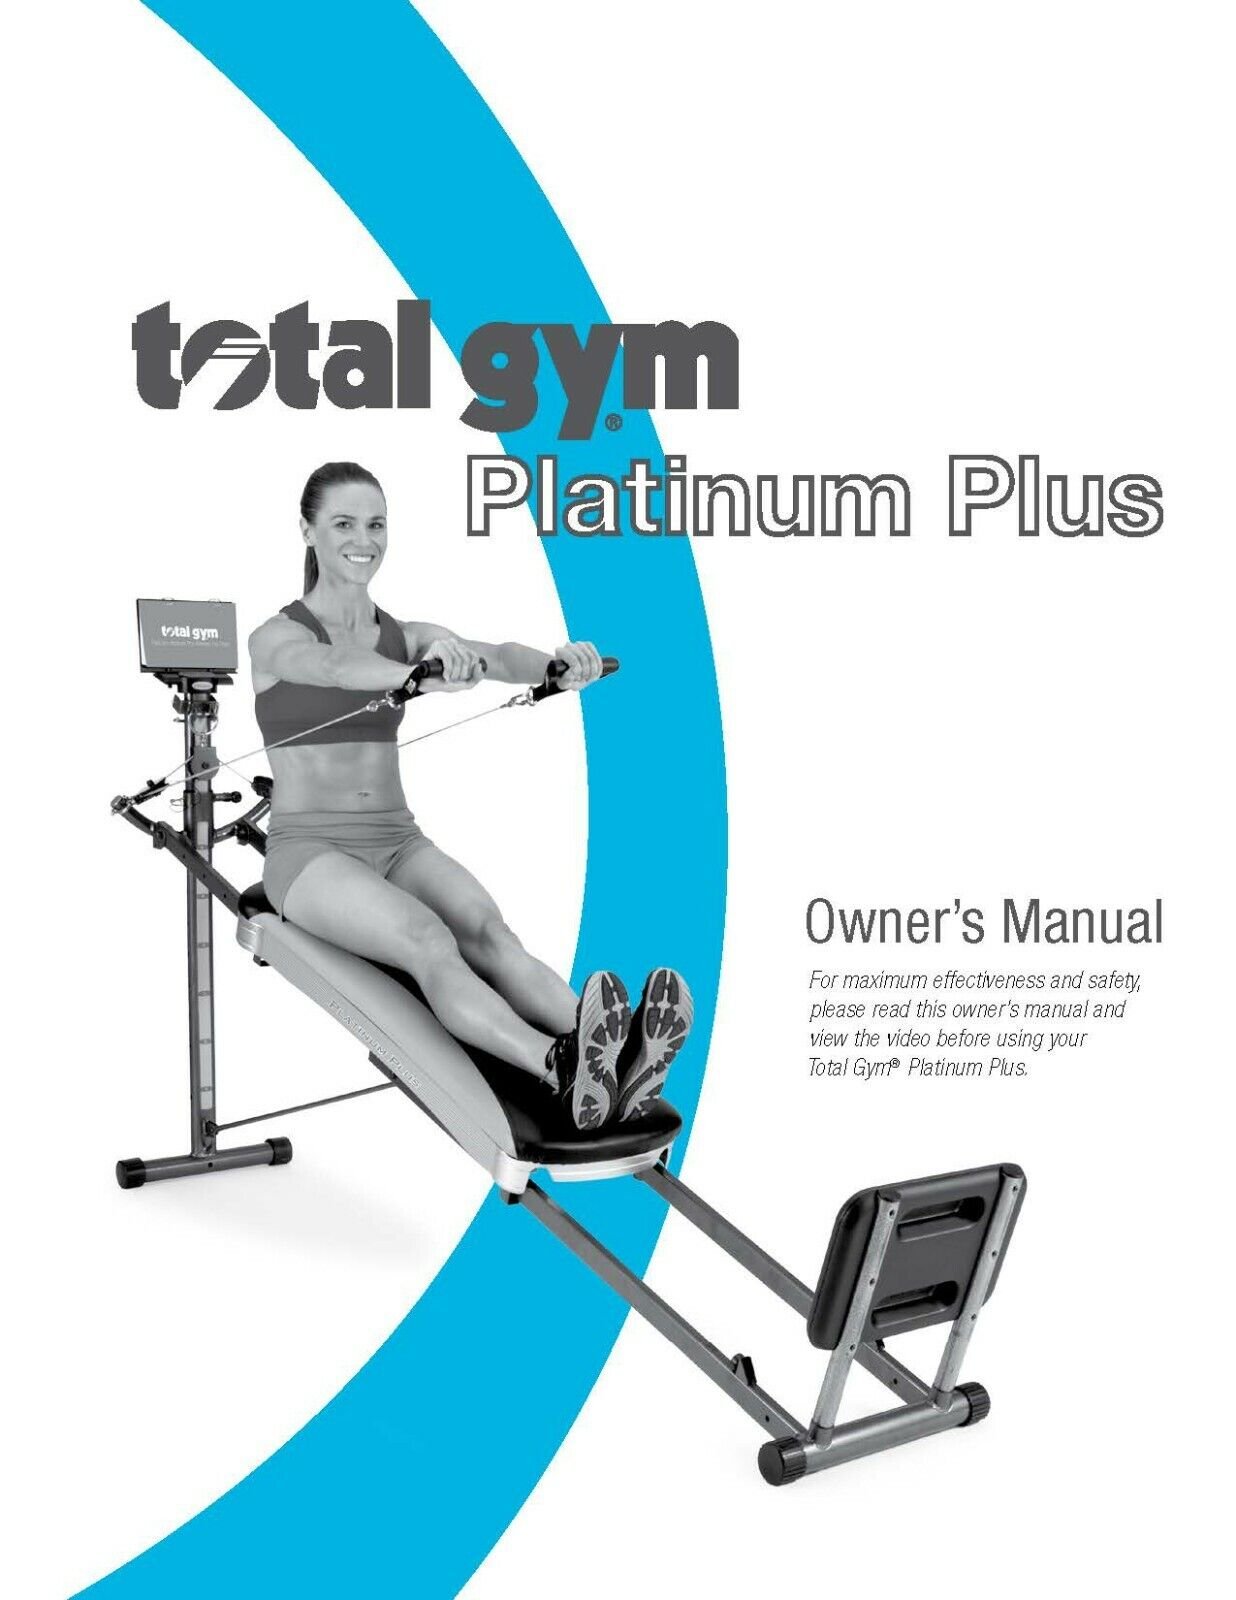 The Ultimate Guide to Setting up Total Gym Power Platinum at Home